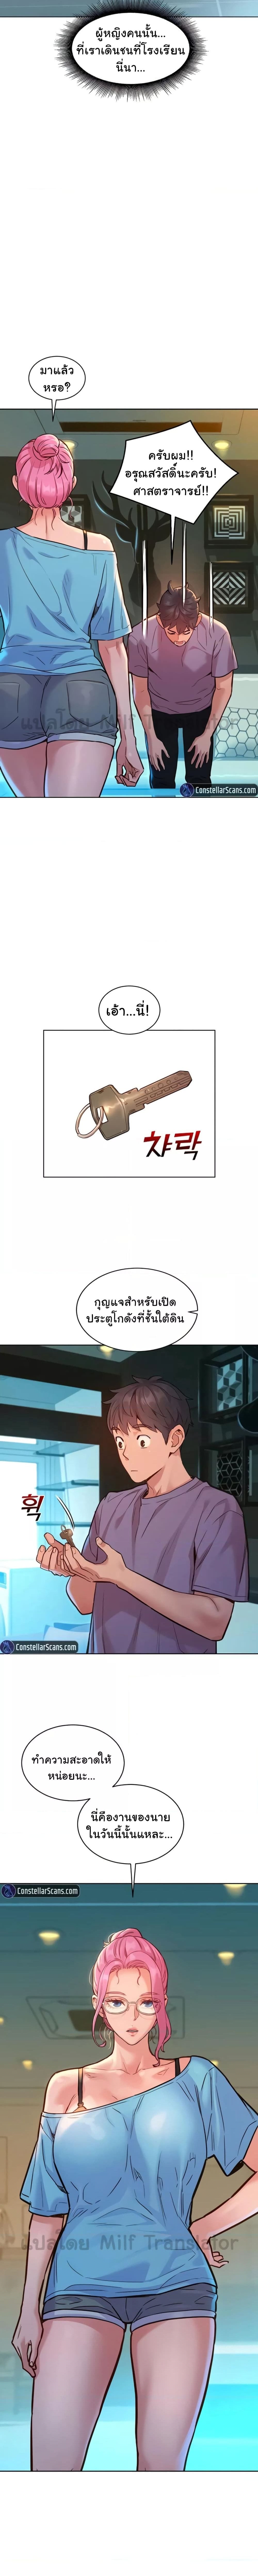 Let’s Hang Out from Today ตอนที่ 17 ภาพ 4